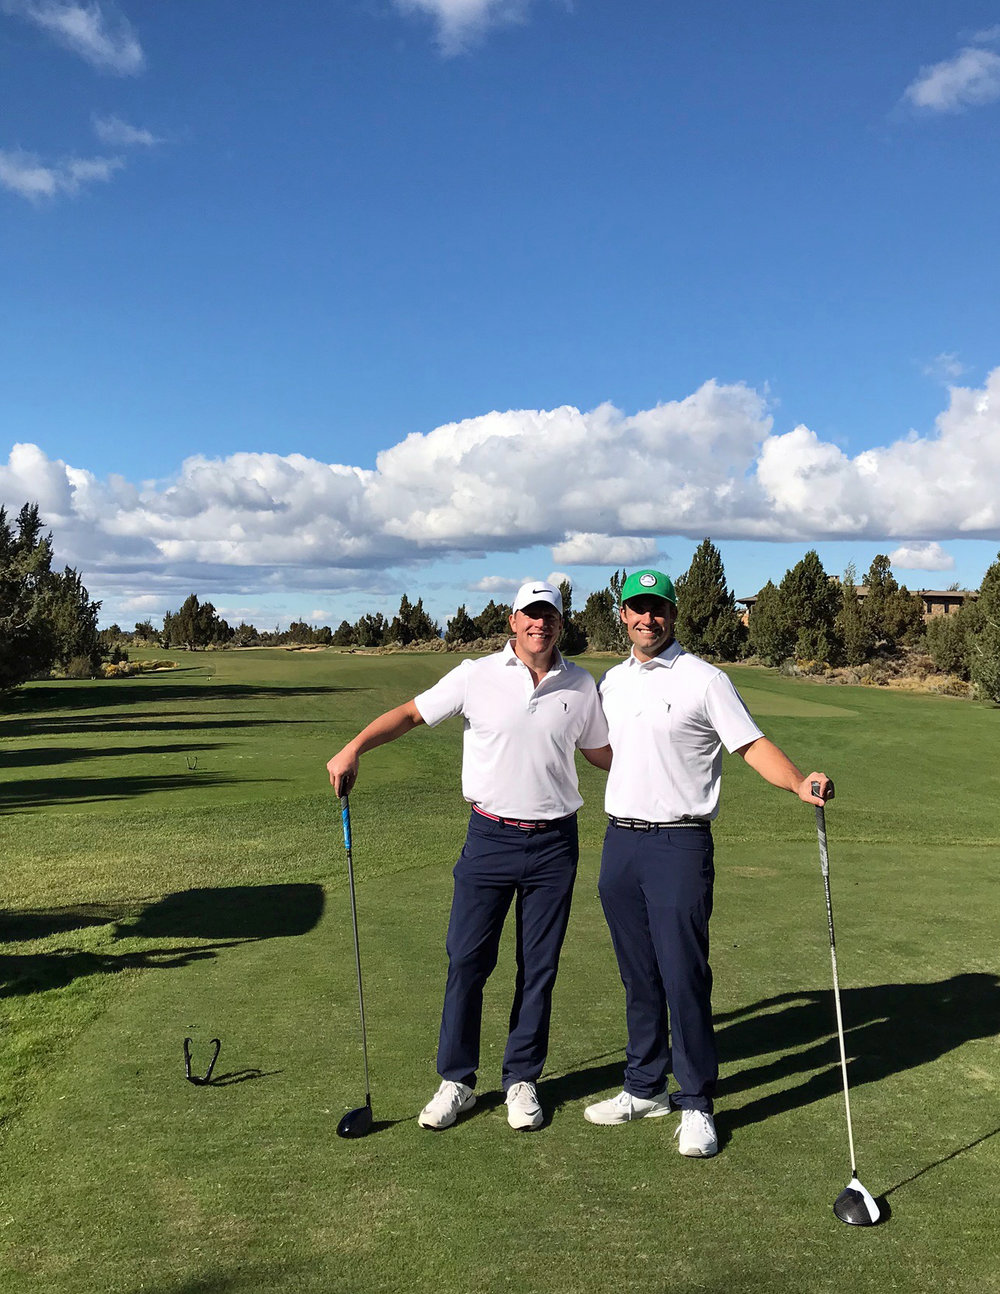 Golf brother don't shake hands. Golf brothers gotta twin!